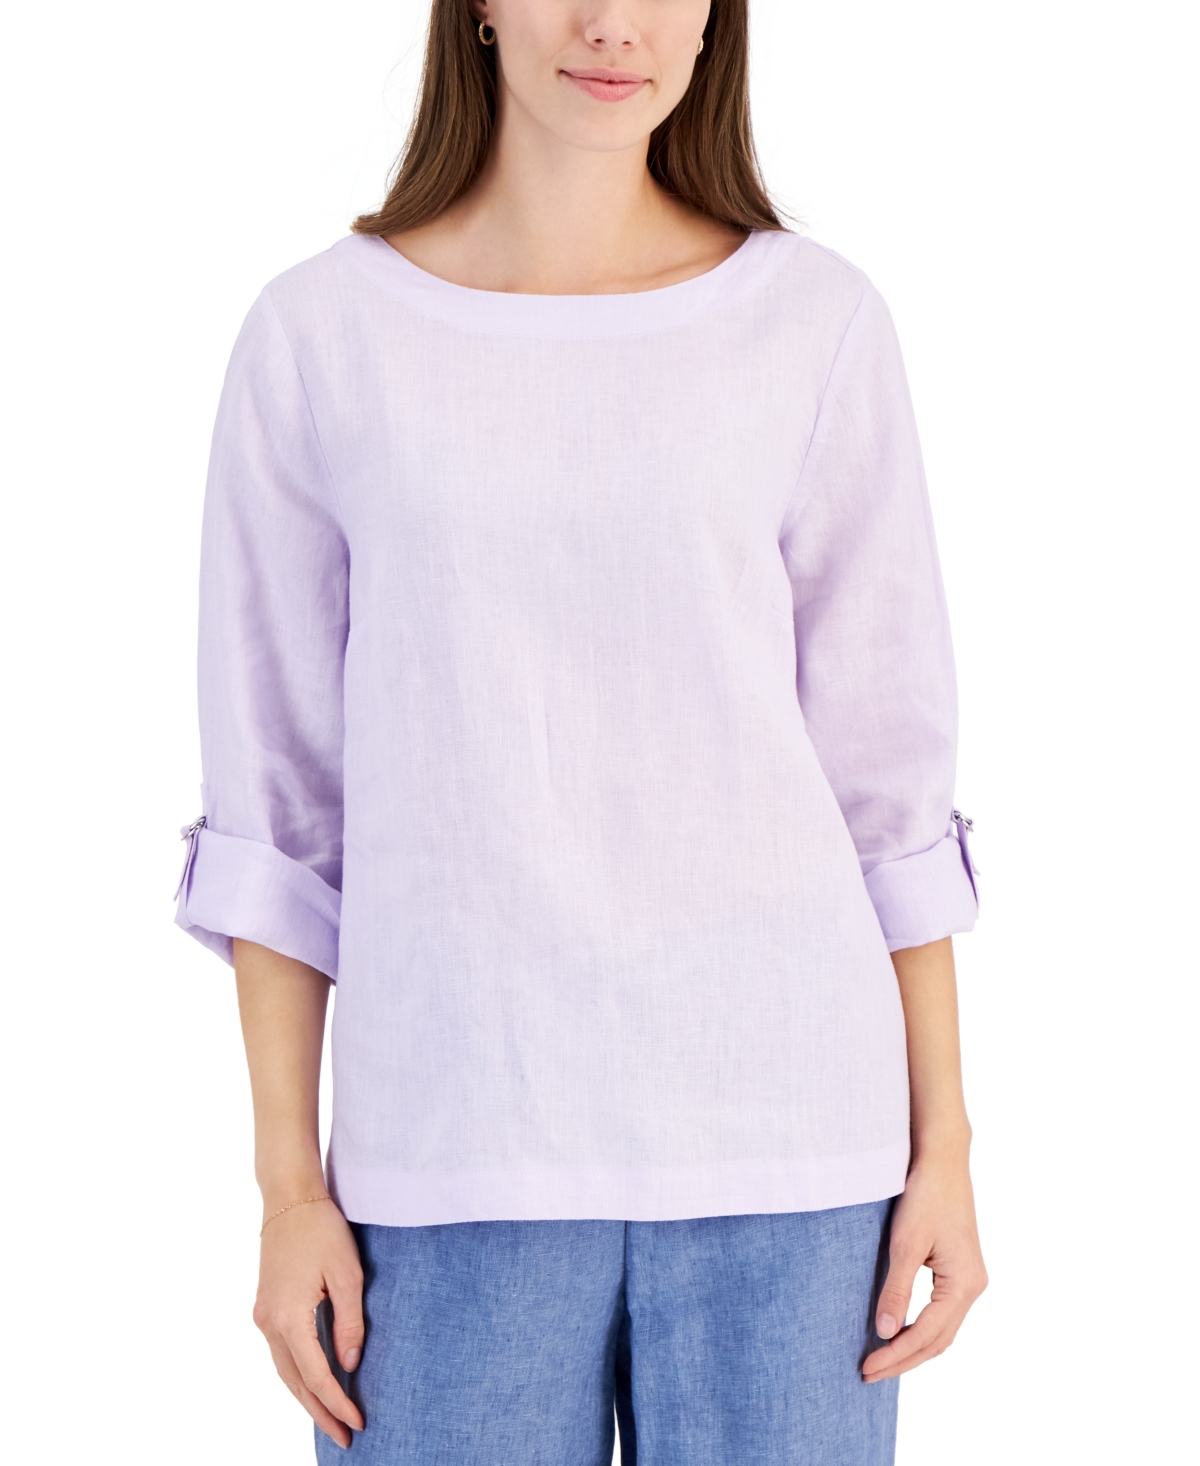 Women's 100% Linen D-Ring Top, Created for Macy's - Intrepid Blue